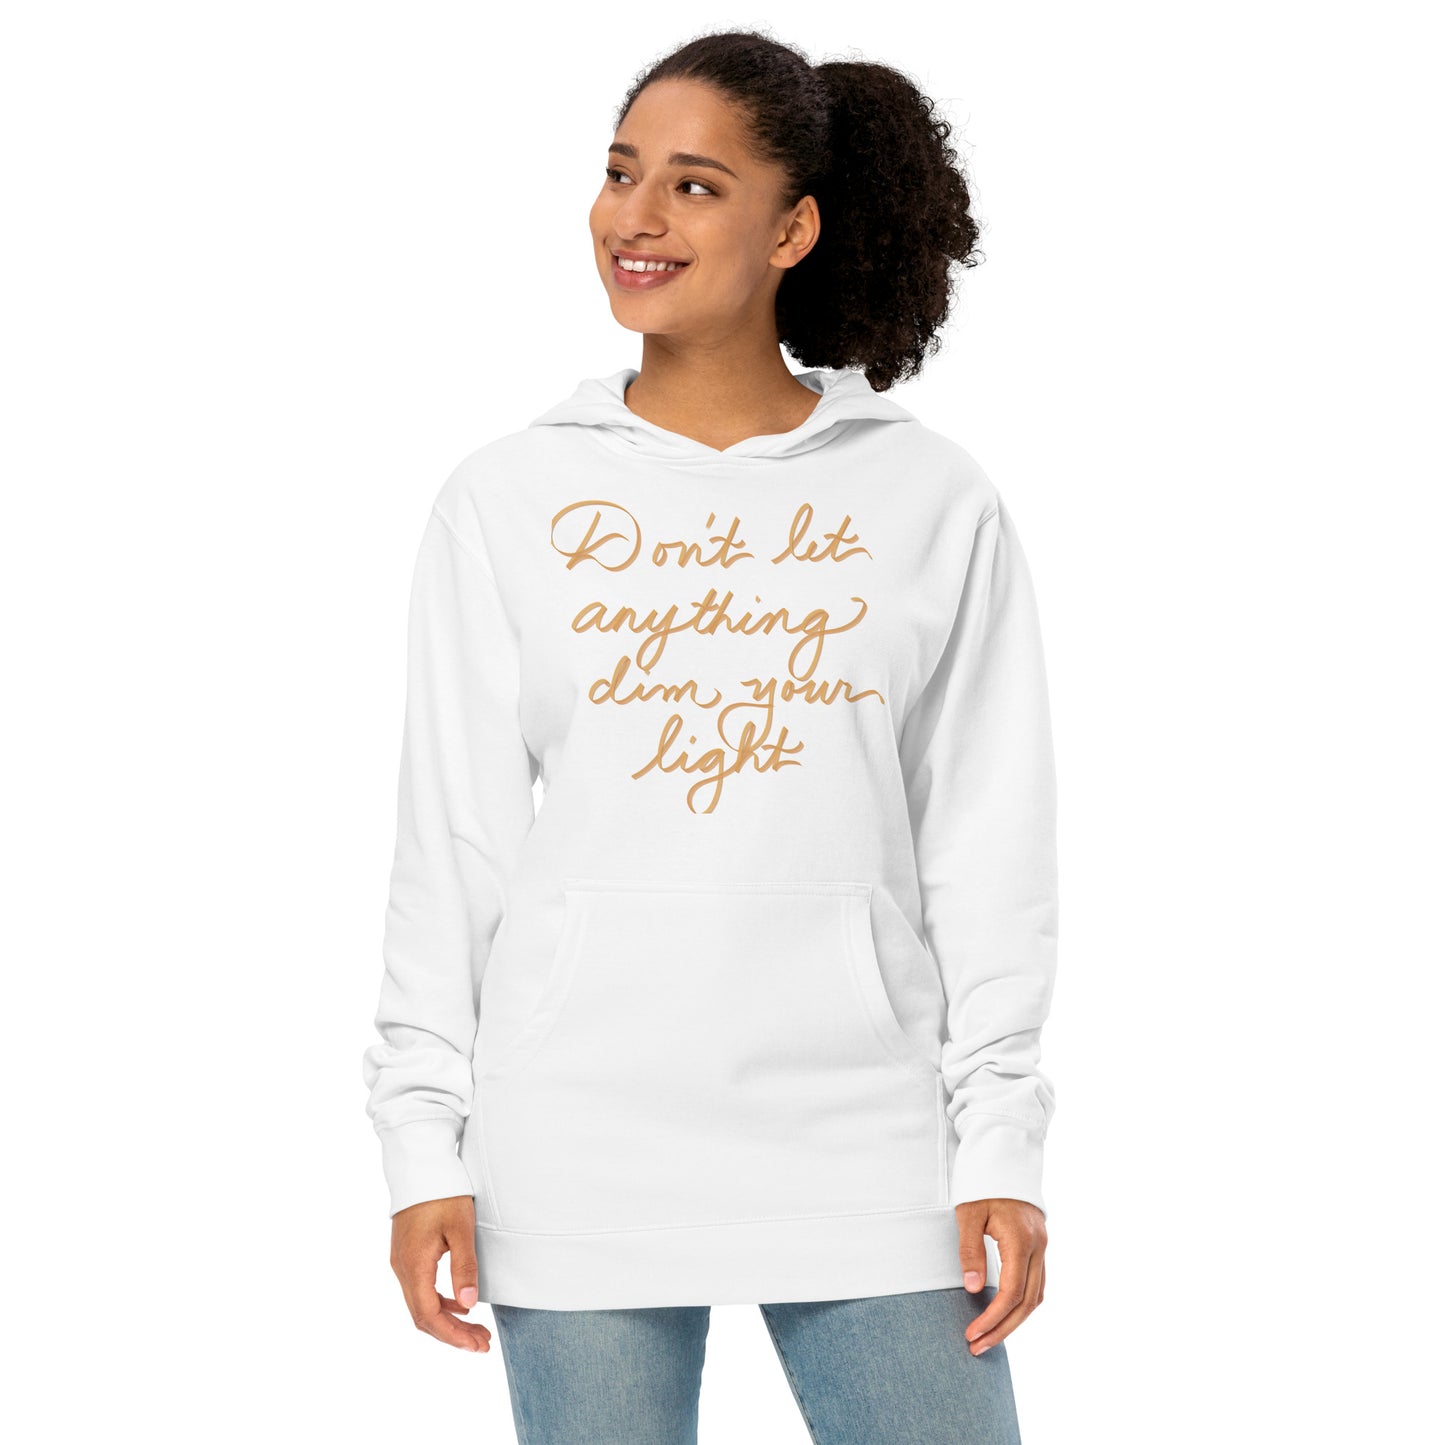 "Don't Dim Your Light" Unisex Midweight Hoodie